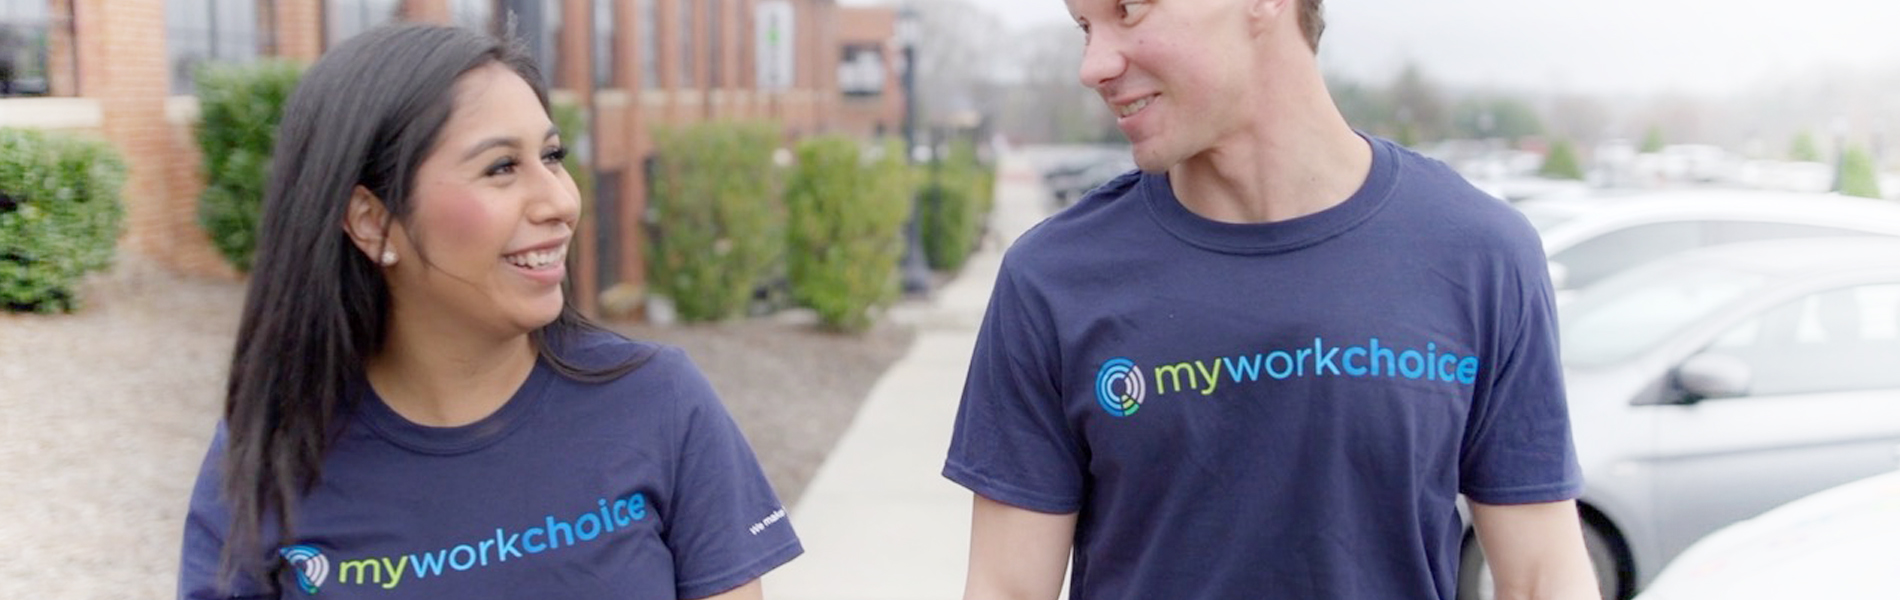 Banner image of two people walking together wearing MyWorkChoice t-shirts